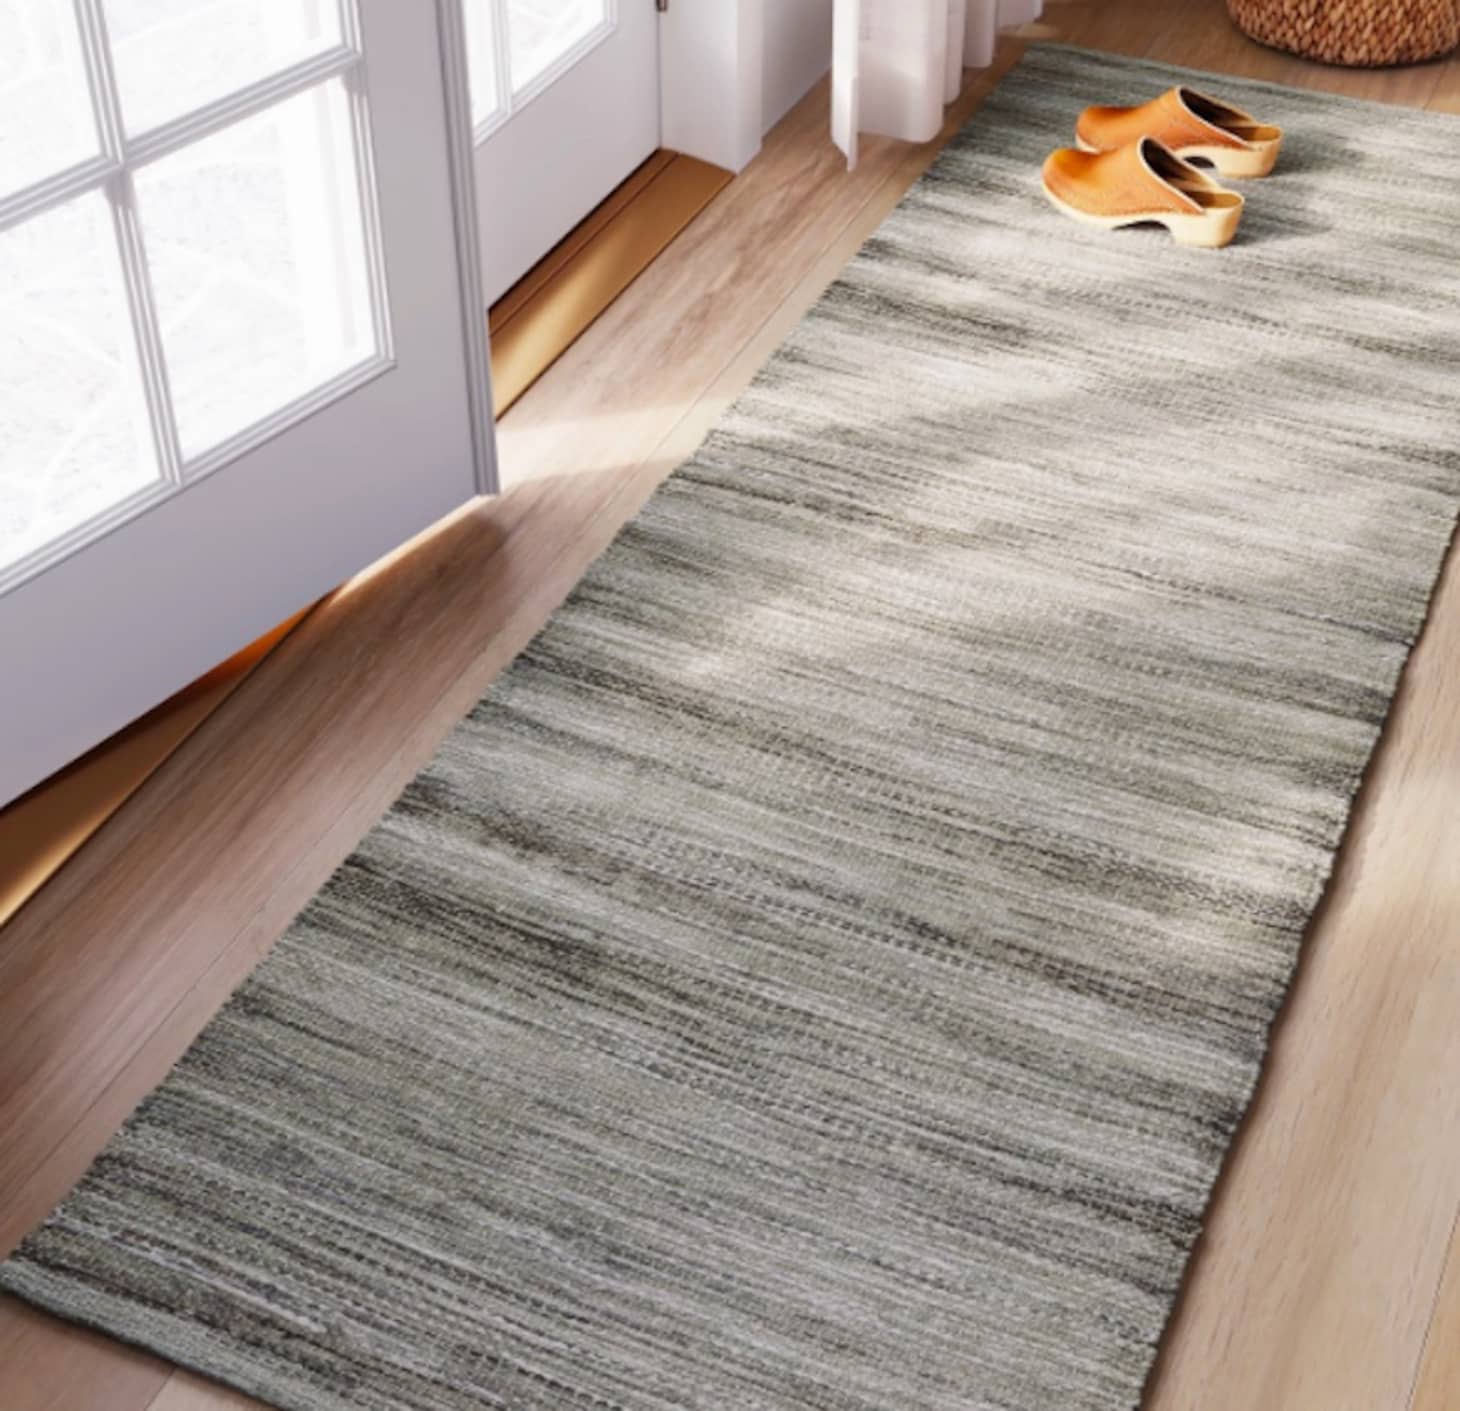 How To Get 25 Off One Rug At Target Today Apartment Therapy